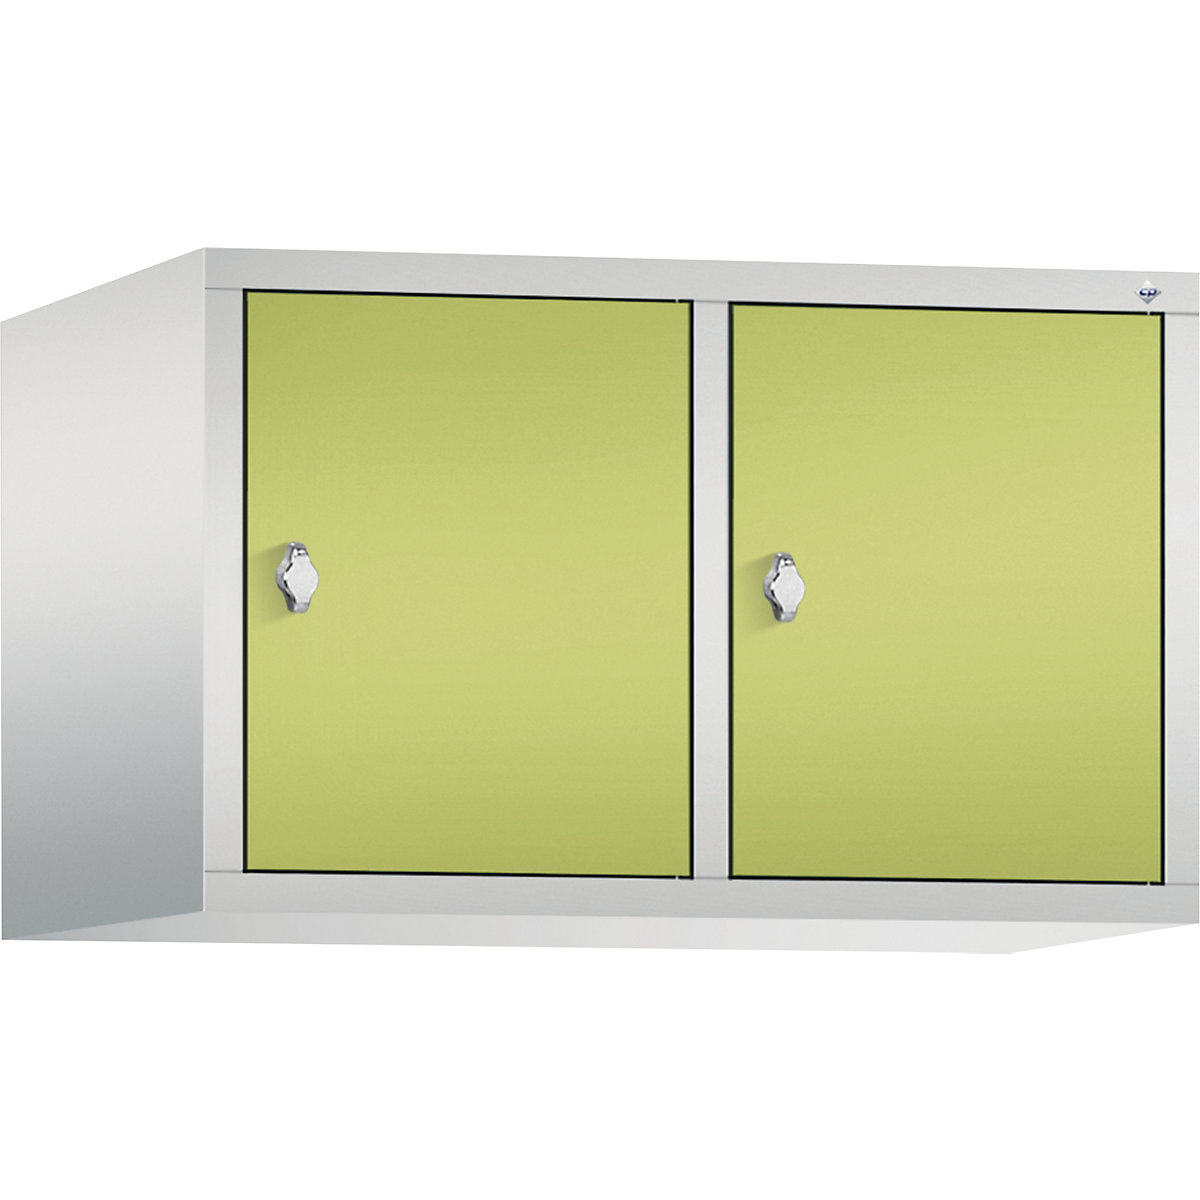 CLASSIC add-on cupboard – C+P, 2 compartments, compartment width 400 mm, light grey / viridian green-12